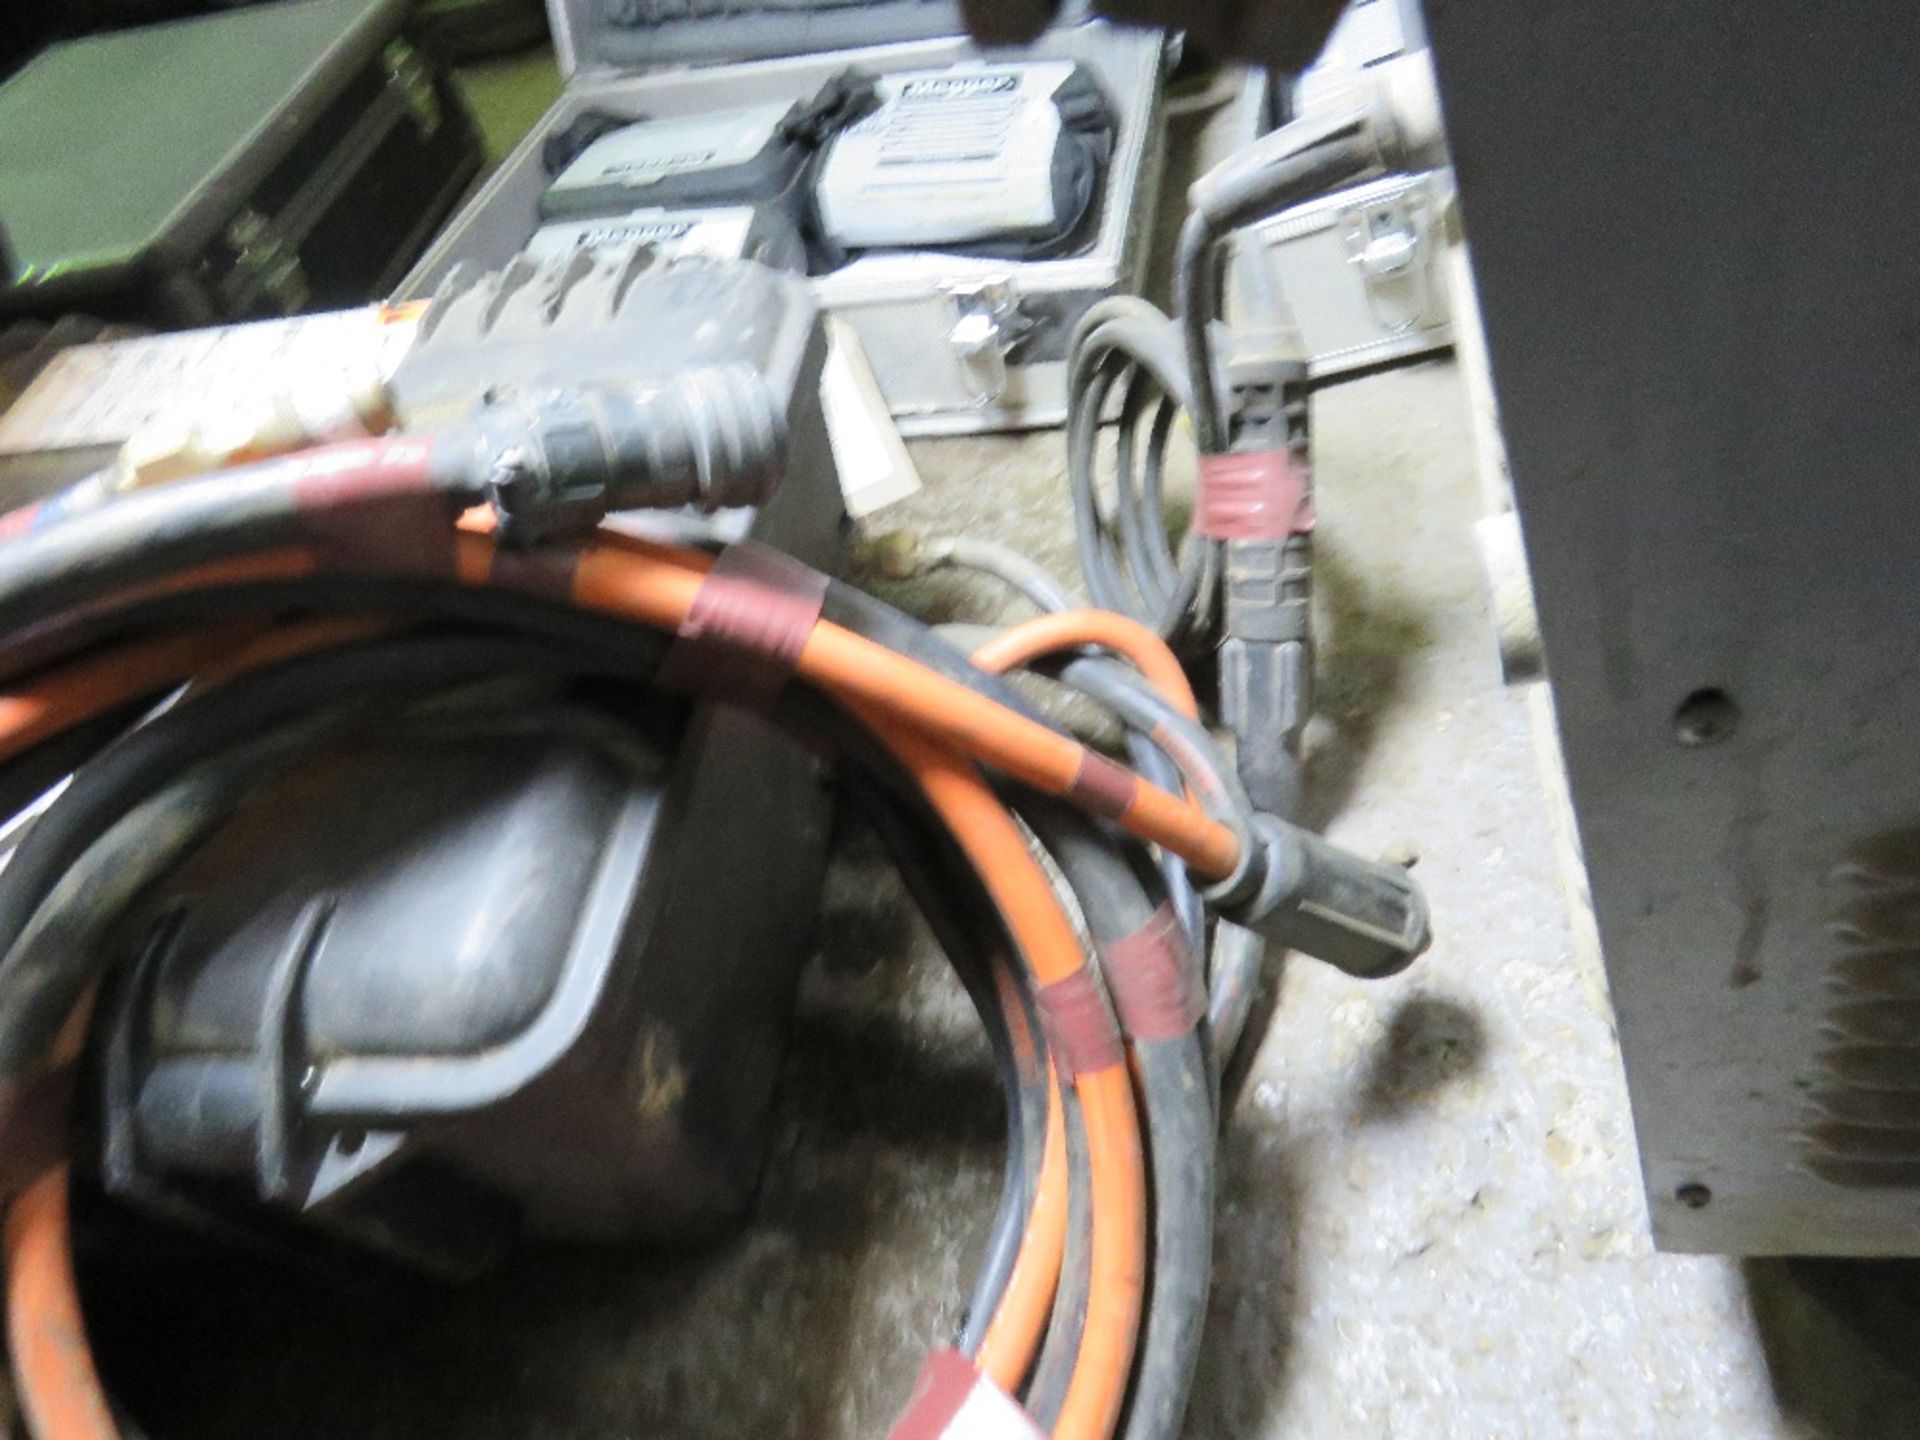 MILLER SUITCASE 12RC WIRE FEED UNIT. SOURCED FROM DEPOT CLEARANCE DUE TO A CHANGE IN COMPANY POLICY. - Image 3 of 3